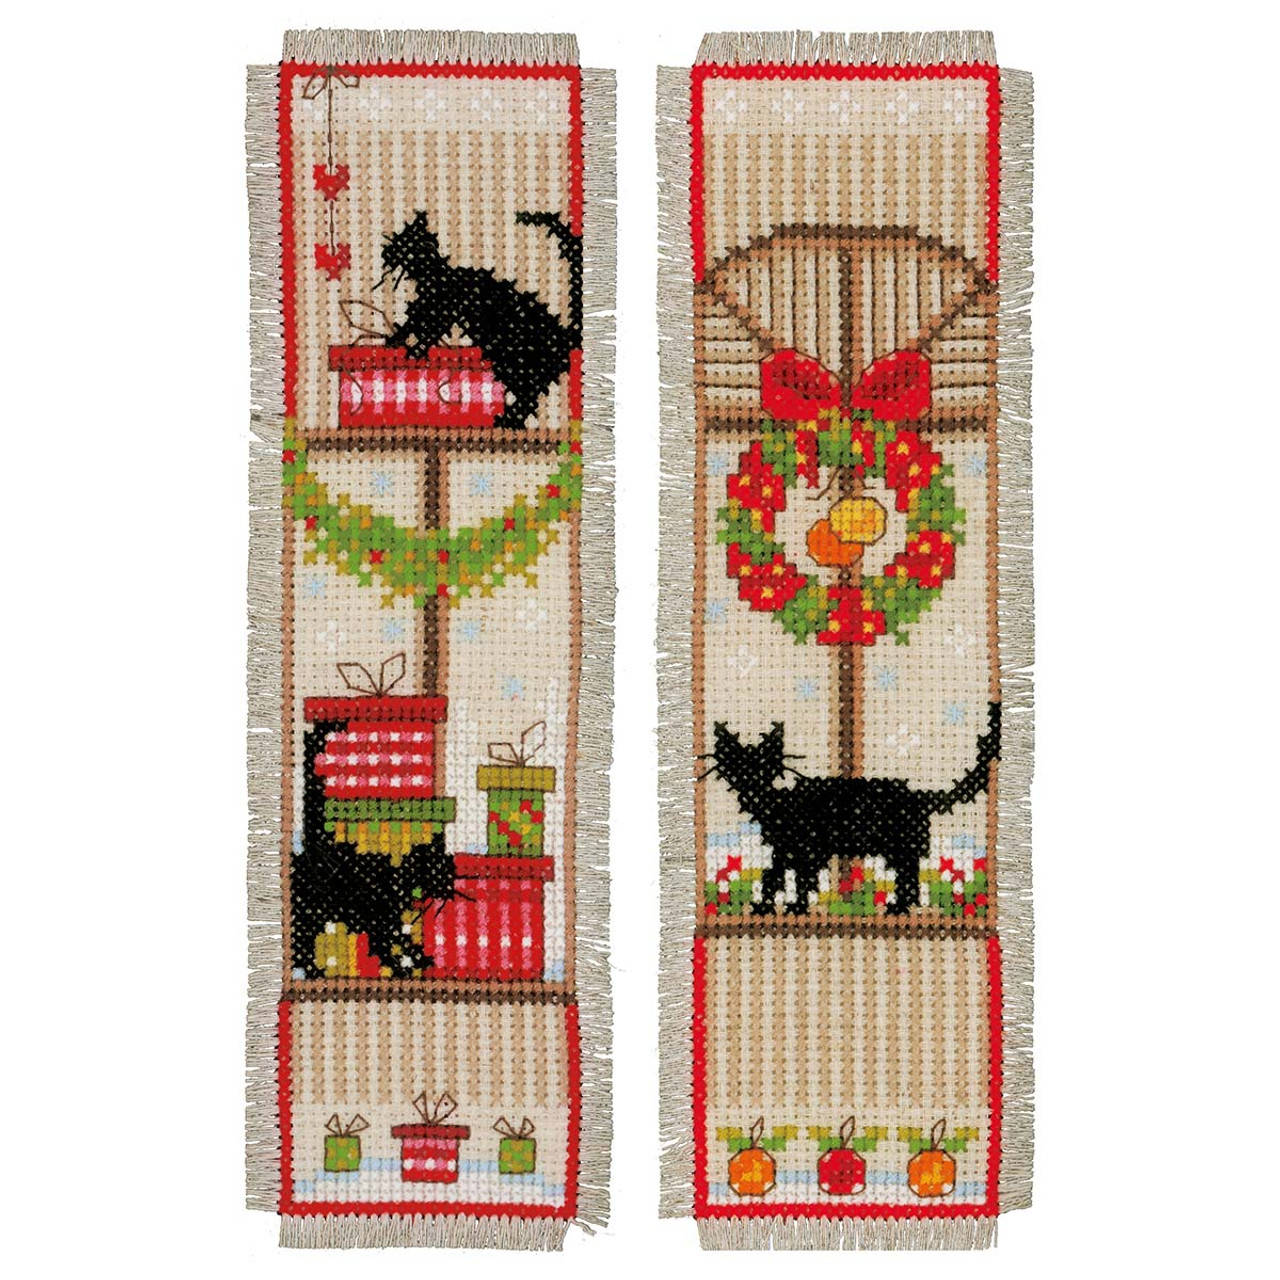 FREEBLOSS 6 Set Cross Stitch Bookmark Counted Cross Stitch Kit with 6  Different Christmas Patterns Embroidery Kit with Instruction DIY Bookmark  Kit